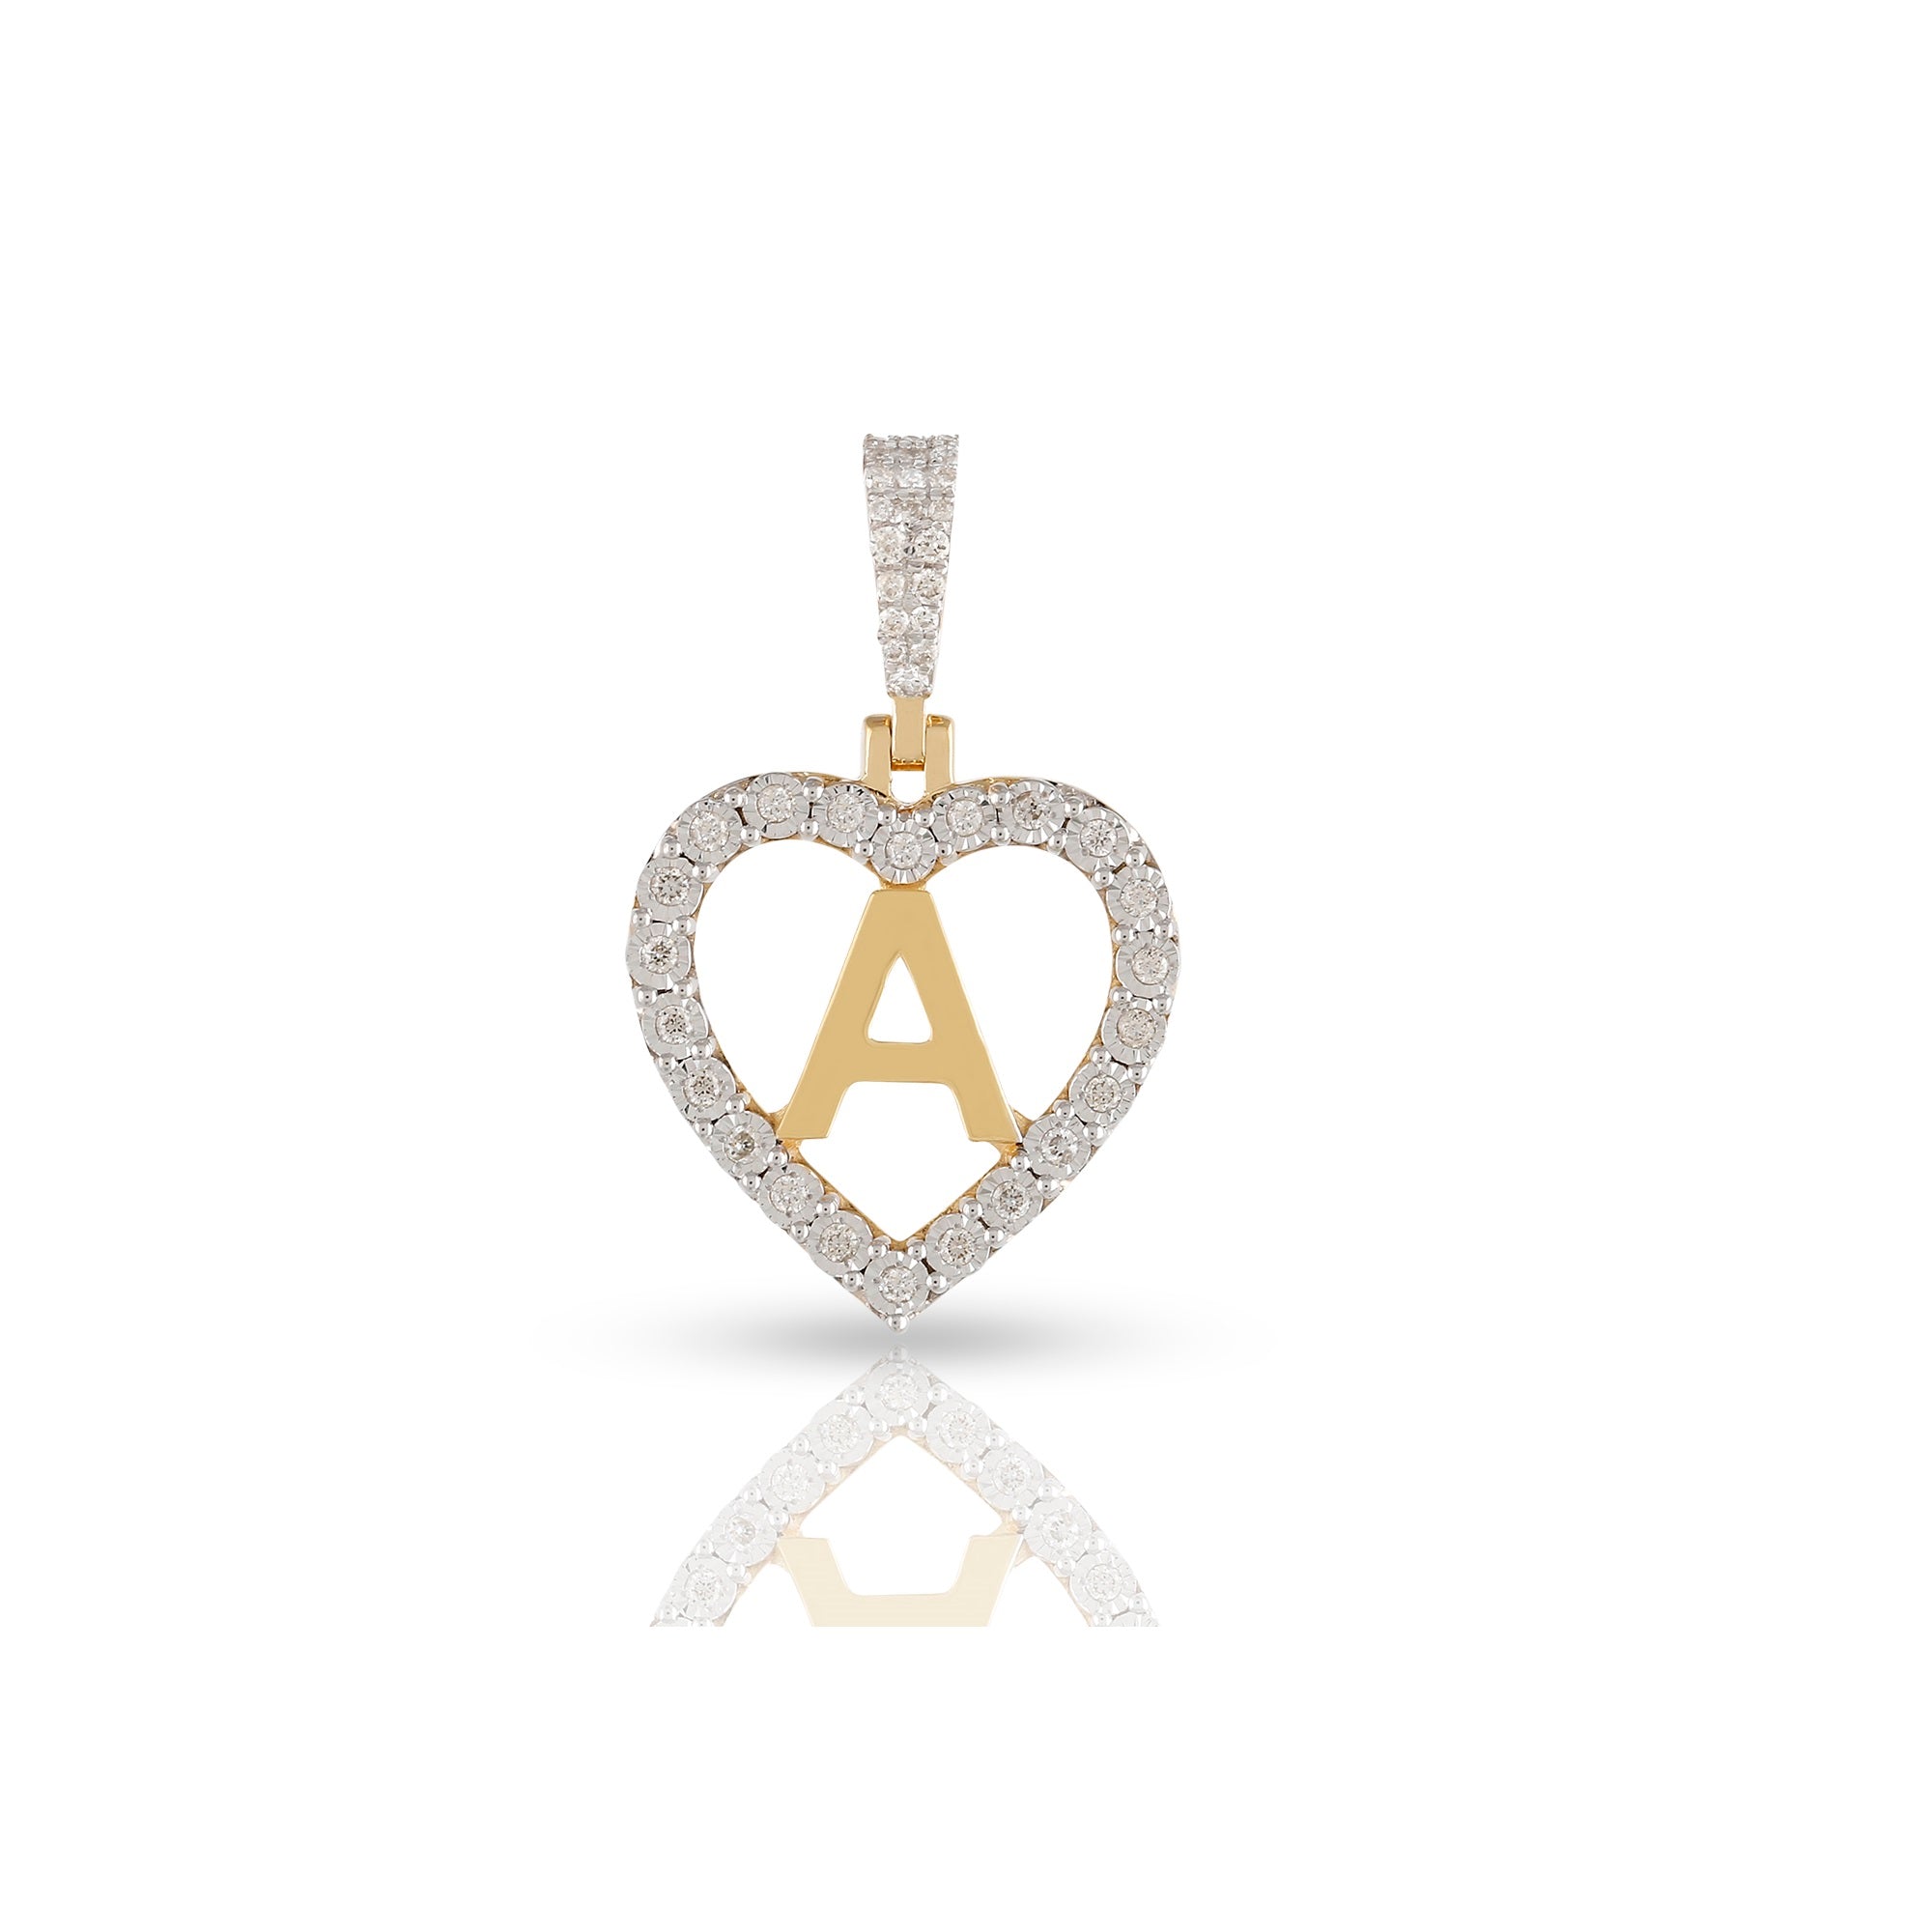 Yellow Gold Heart Shaped 'A to Z' Initial Pendant by Rafaela Jewelry